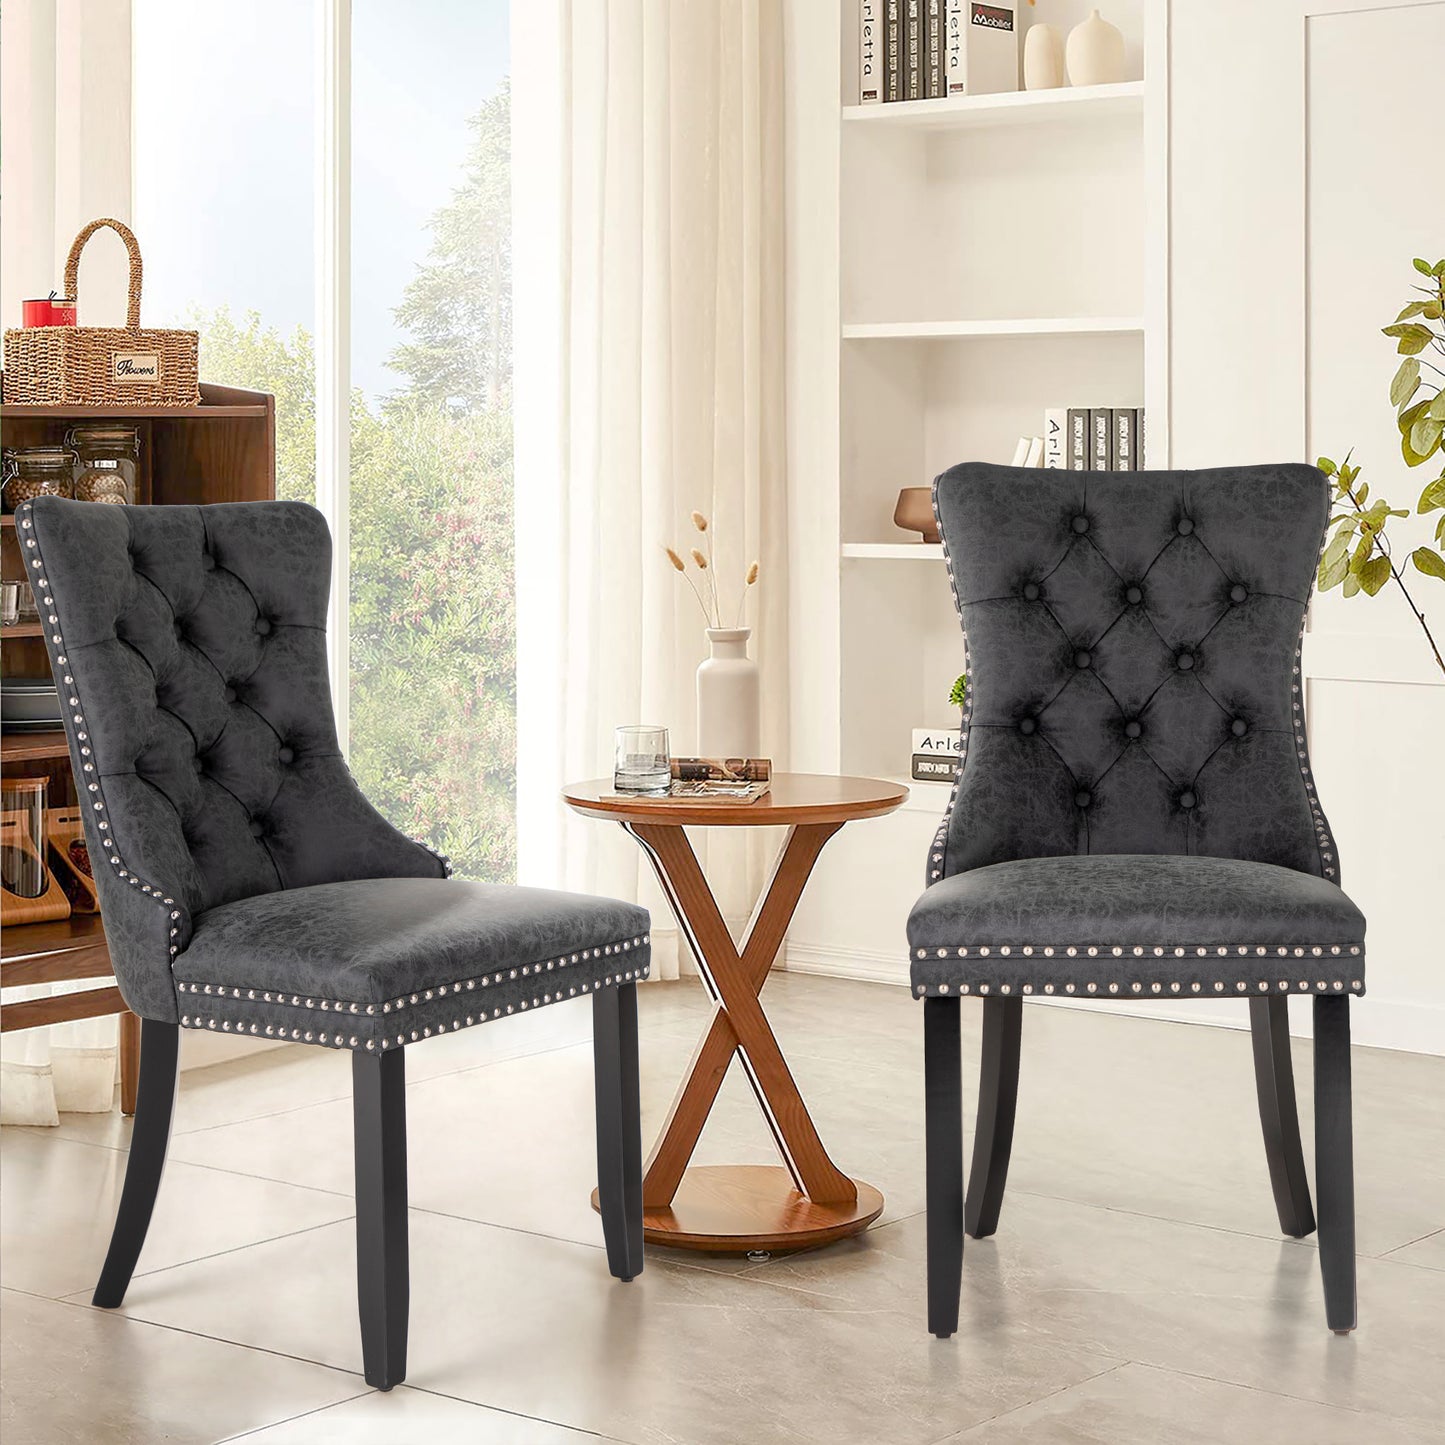 Sophia & William PU Leather Upholstered Dining Chairs with Ring Back-Set of 2-Black